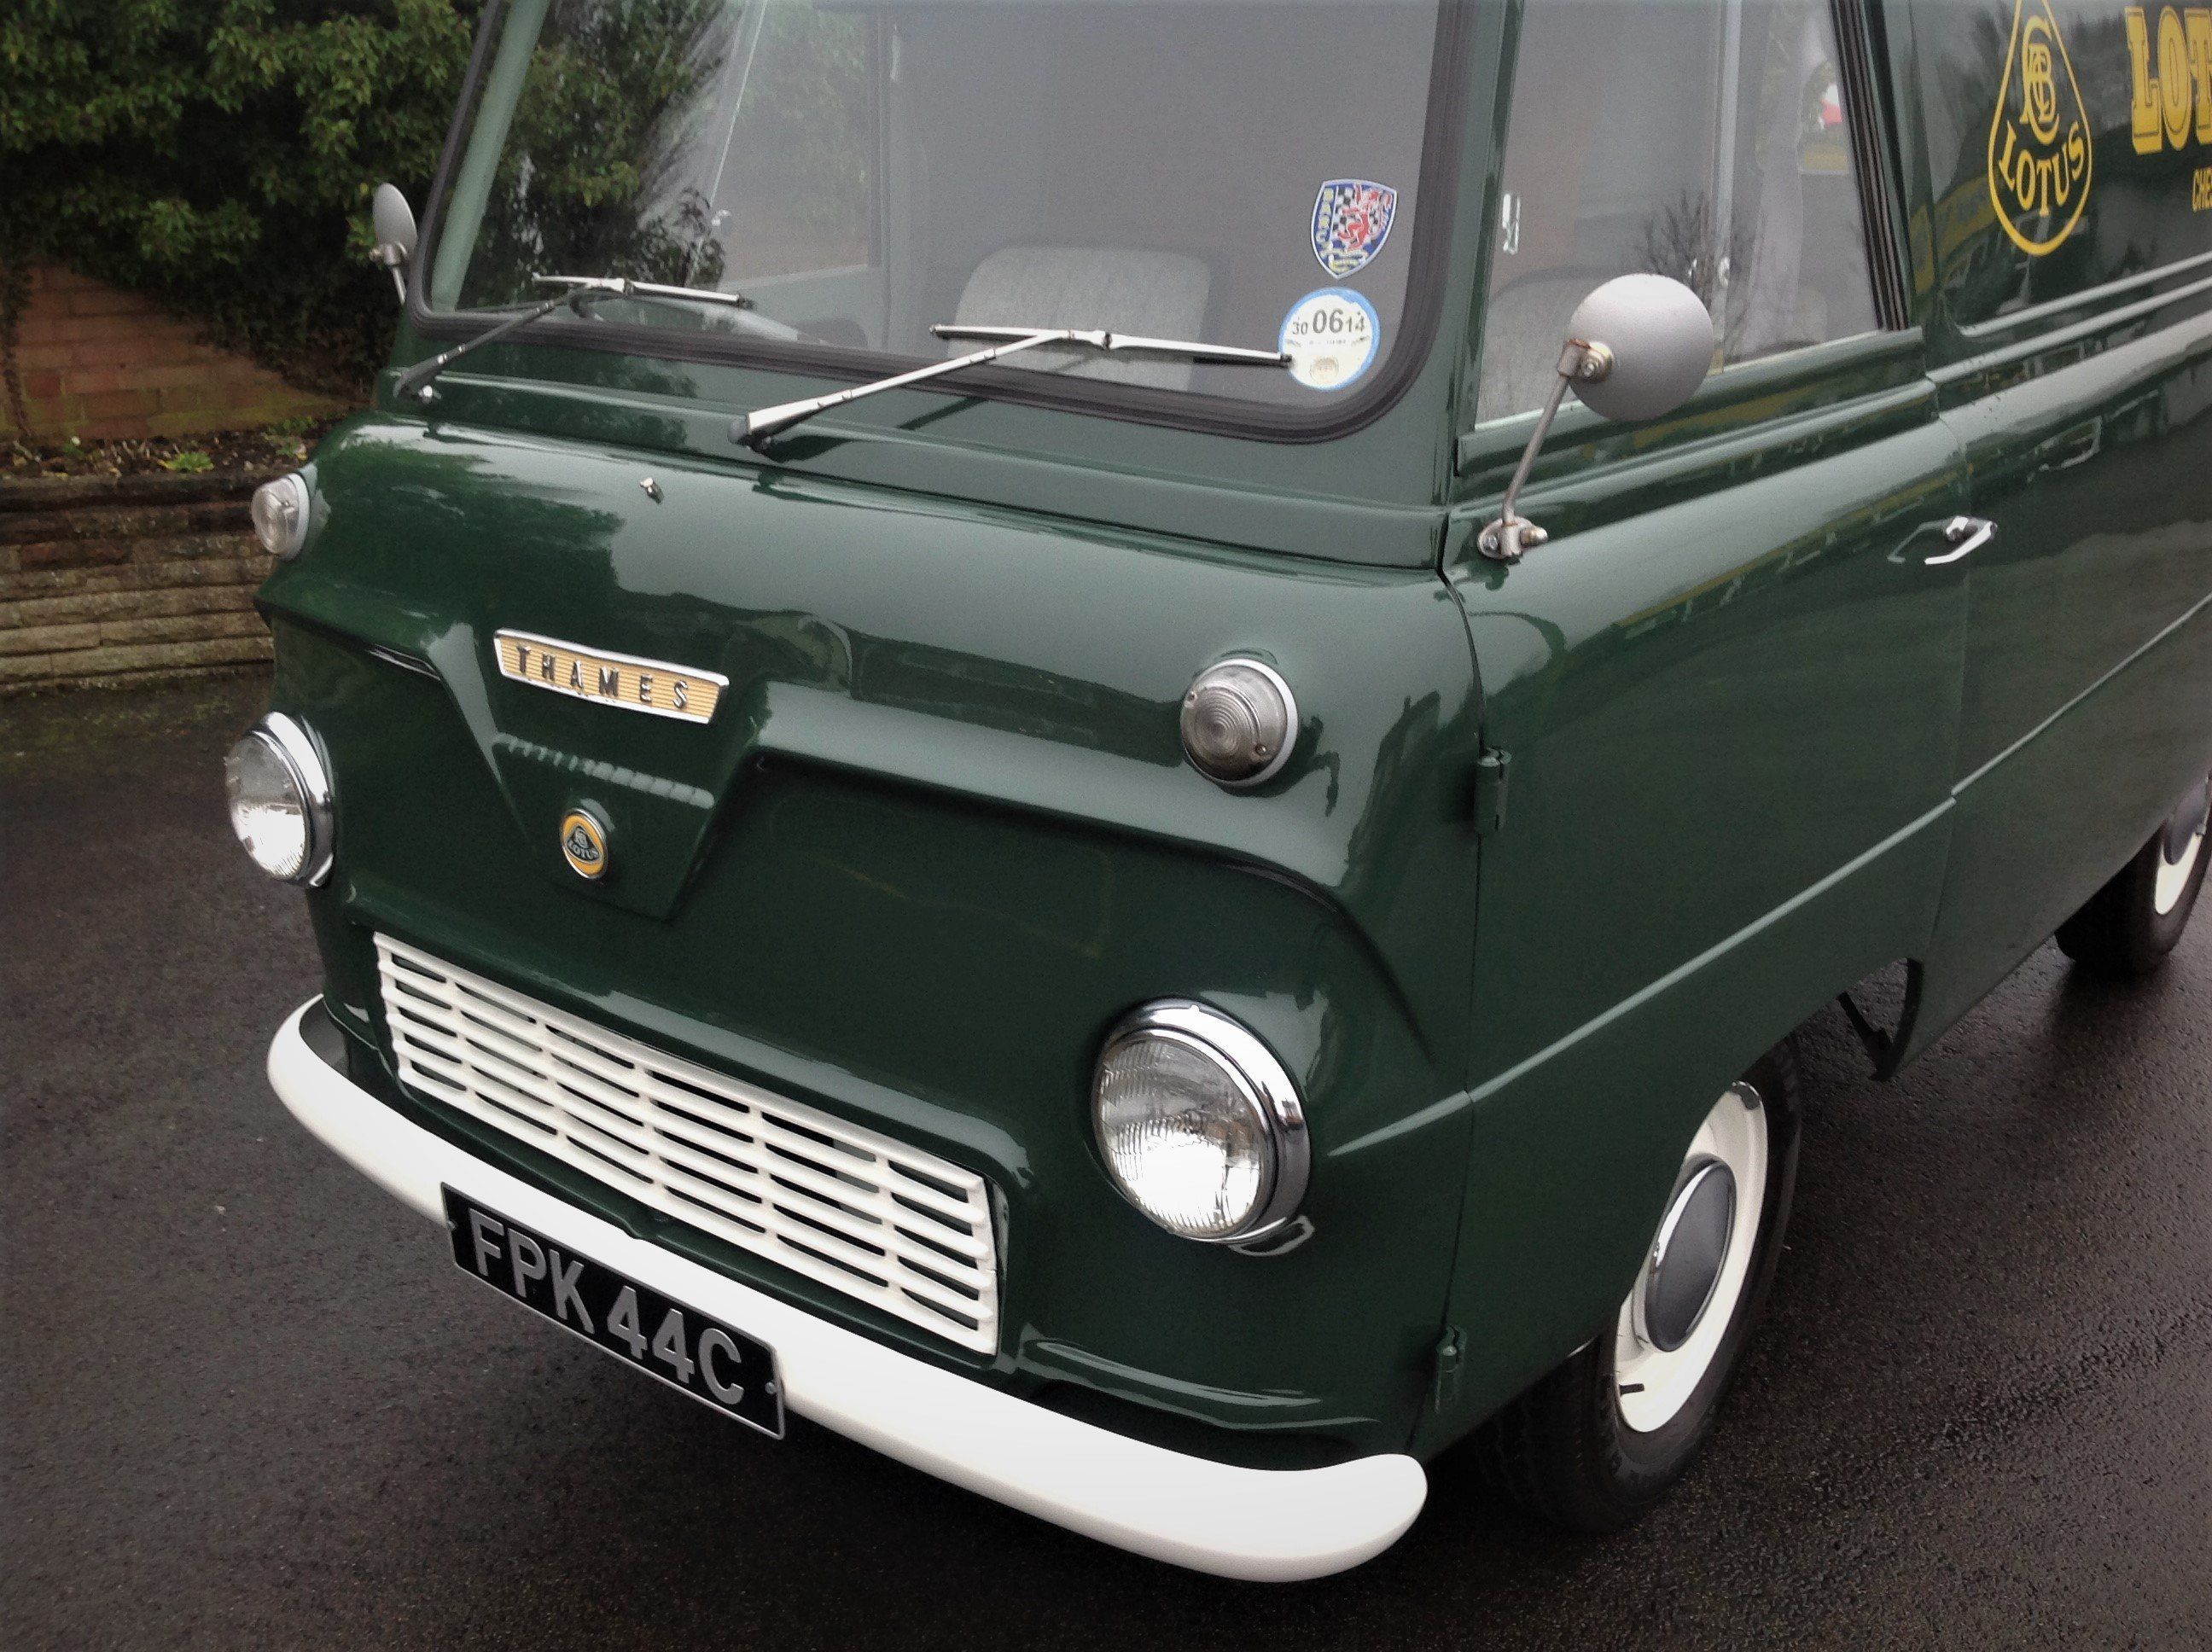 Thames 400E, Manufactured by Ford of UK